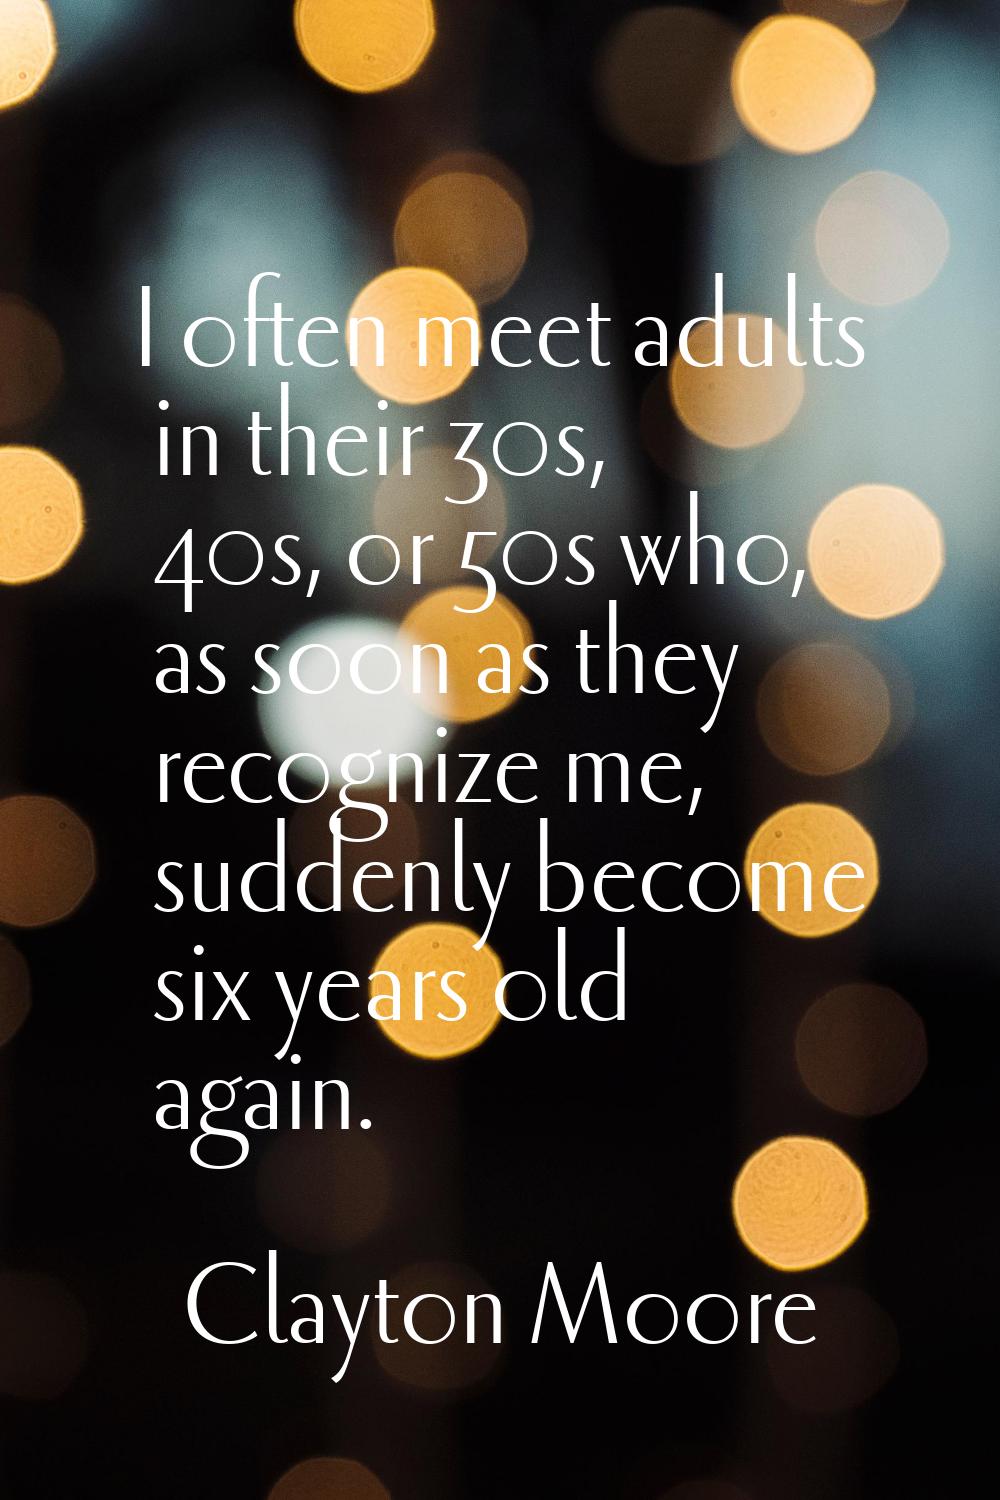 I often meet adults in their 30s, 40s, or 50s who, as soon as they recognize me, suddenly become si